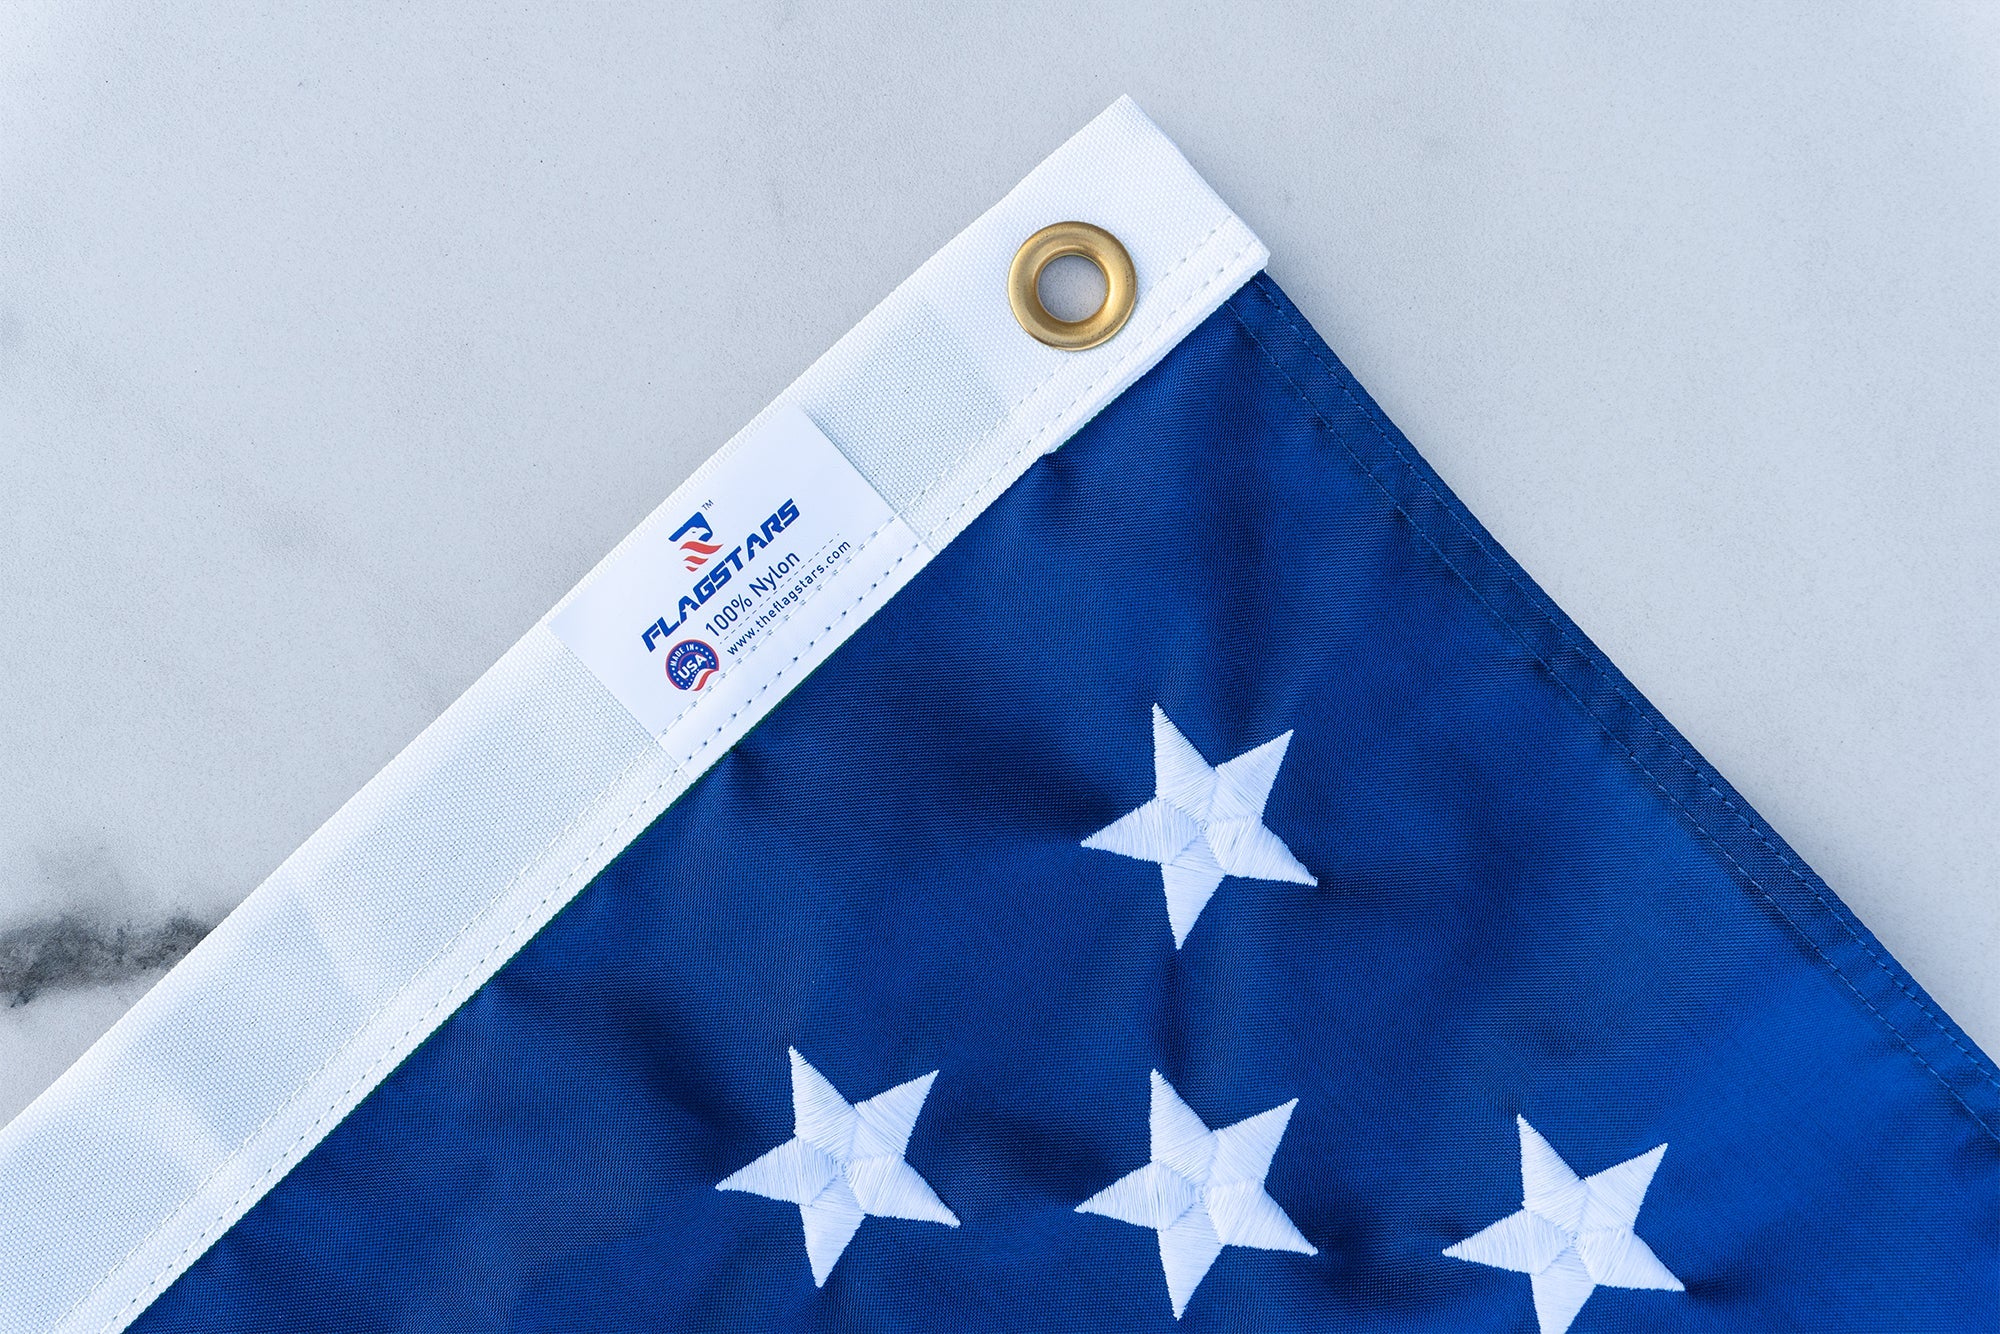 Close-up of a corner of a folded American flag, showing the blue field with white stars, brass grommet, and the label "FlagStars, made in USA," set against a light gray background.